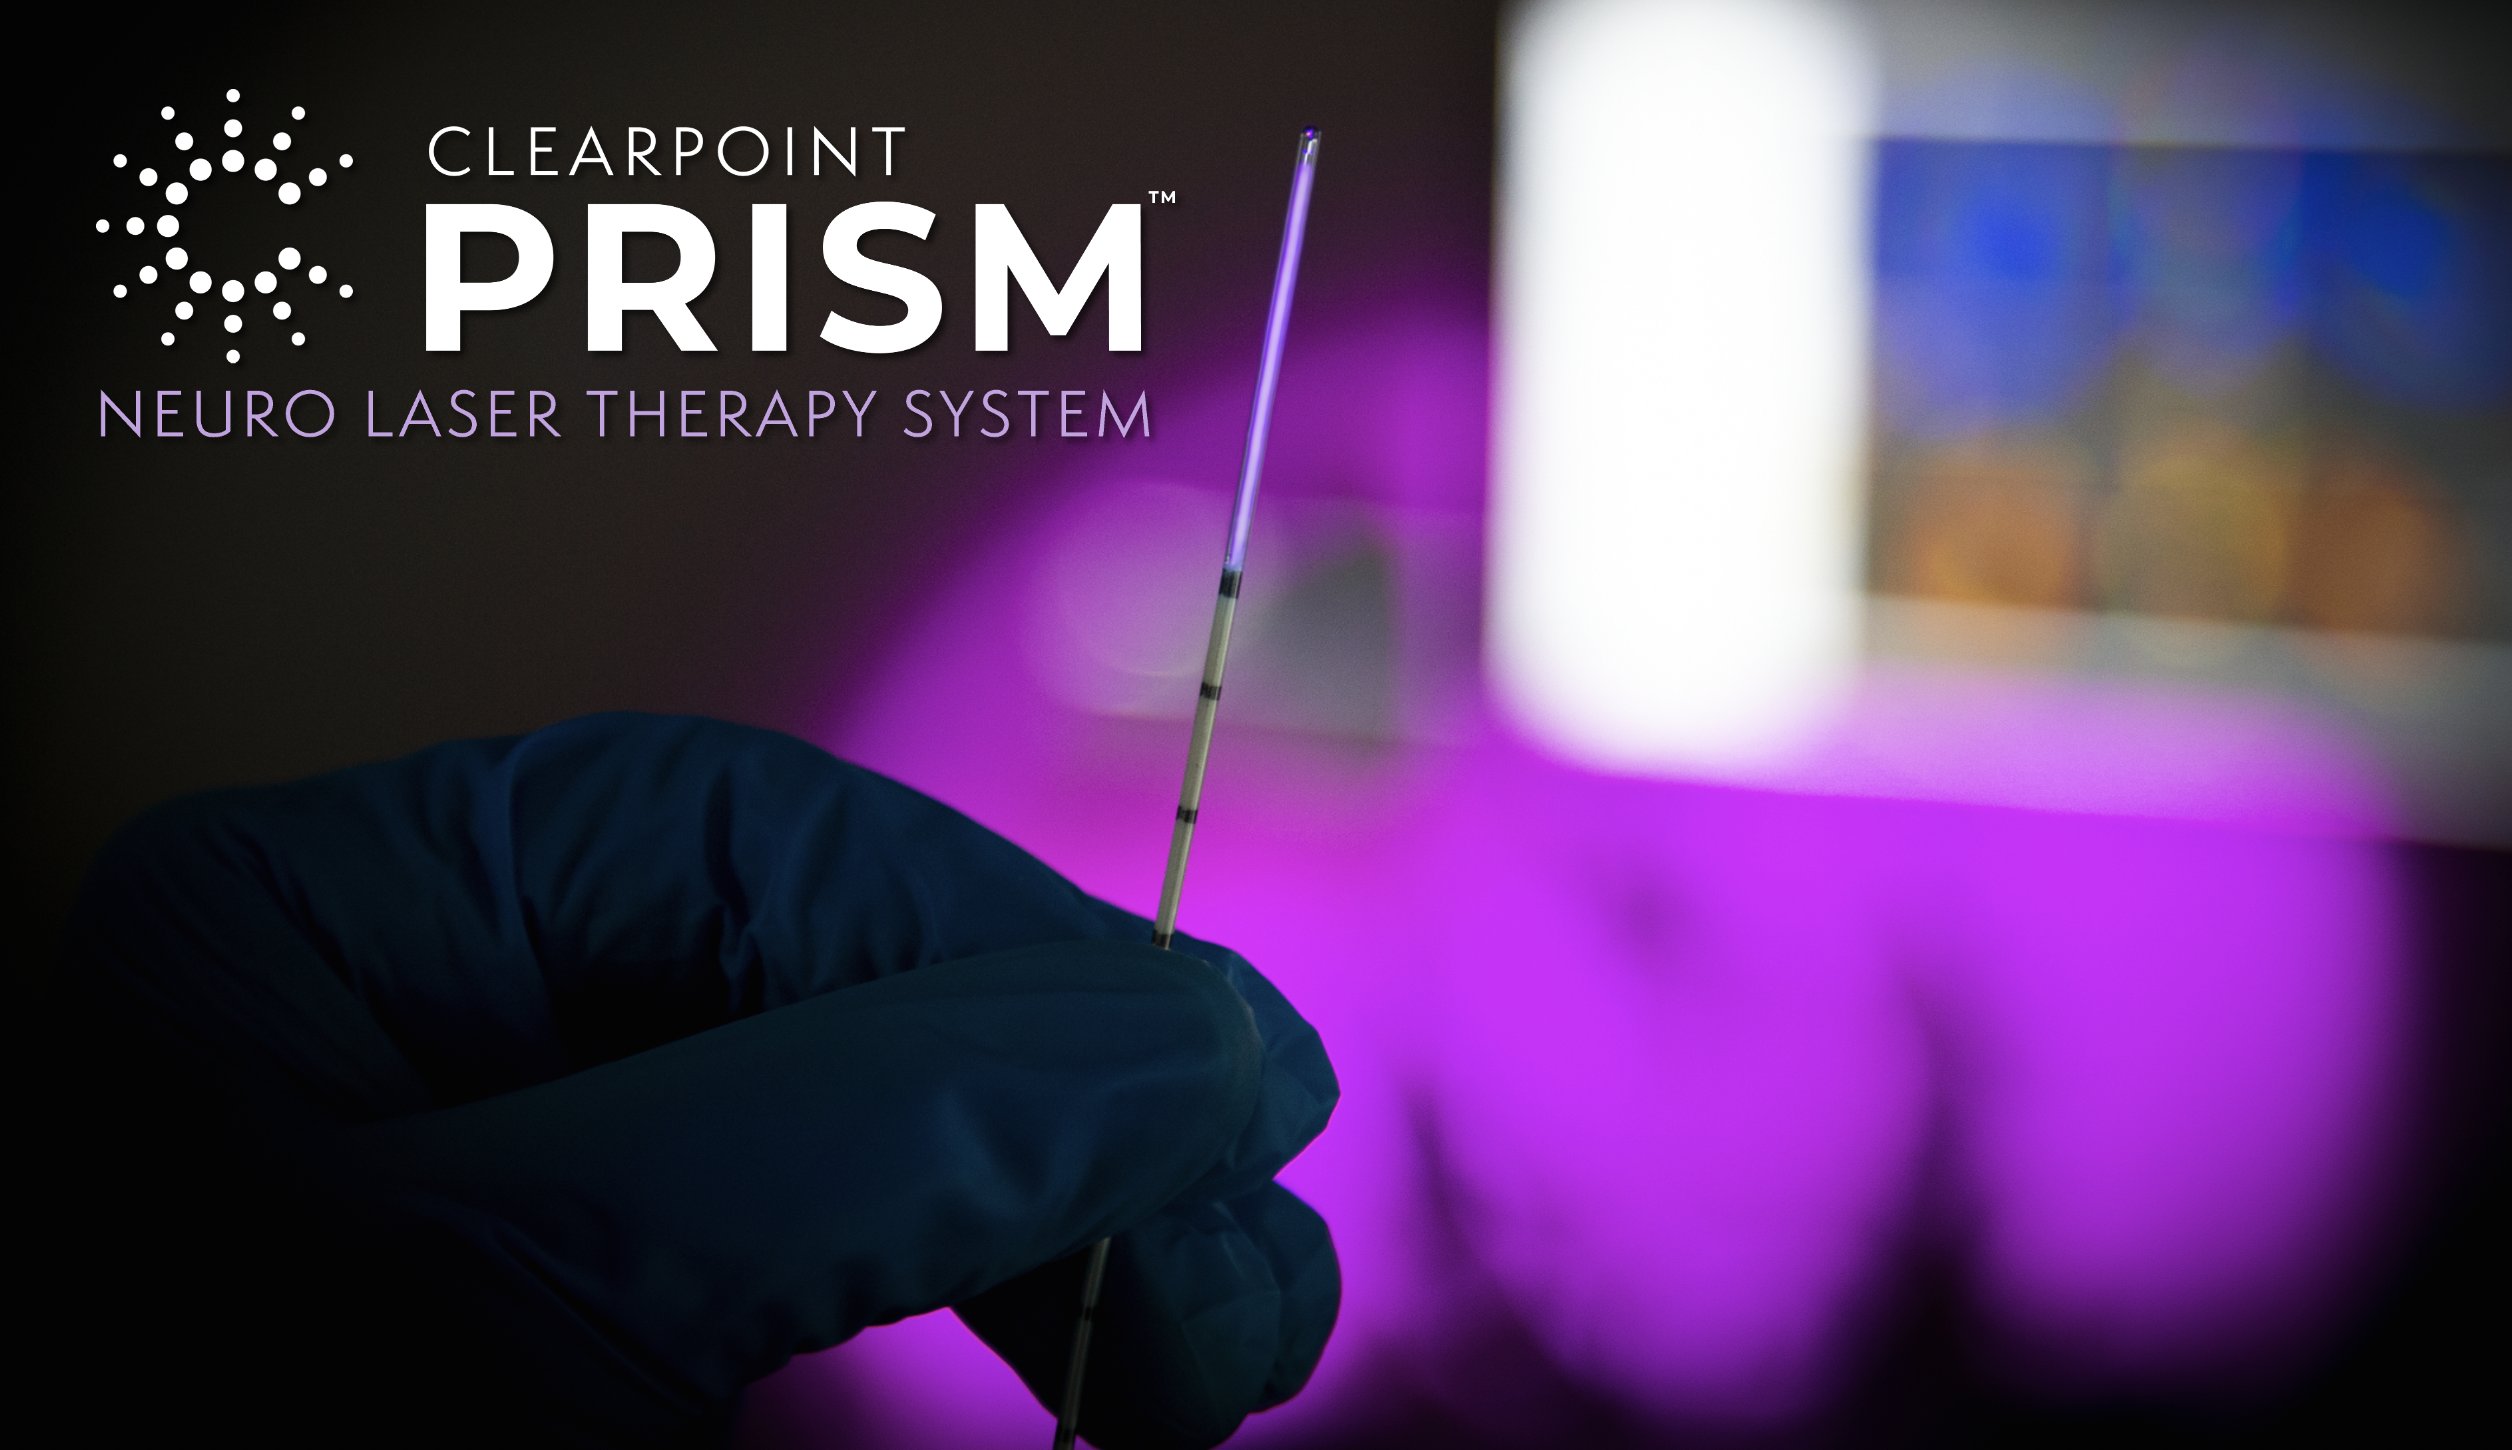 ClearPoint Prism(TM) Neuro Laser Therapy System